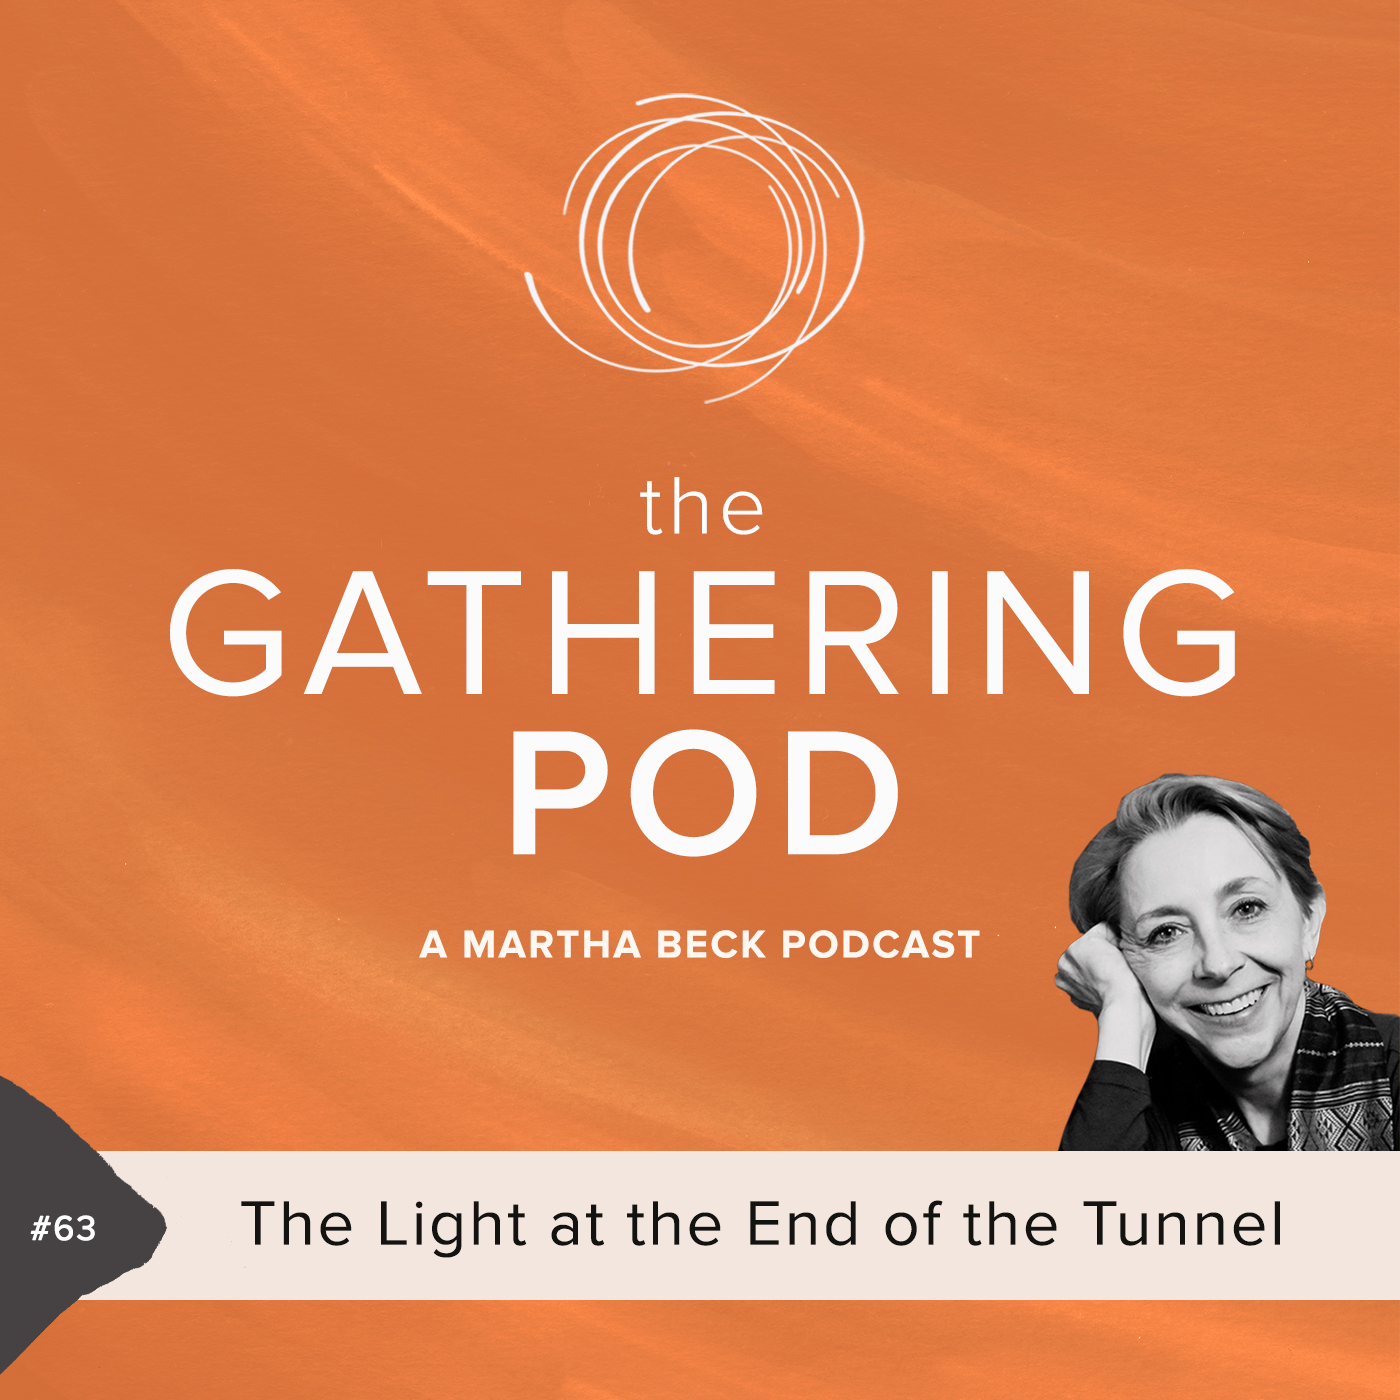 Image for The Gathering Pod A Martha Beck Podcast Episode #63 The Light at the End of the Tunnel